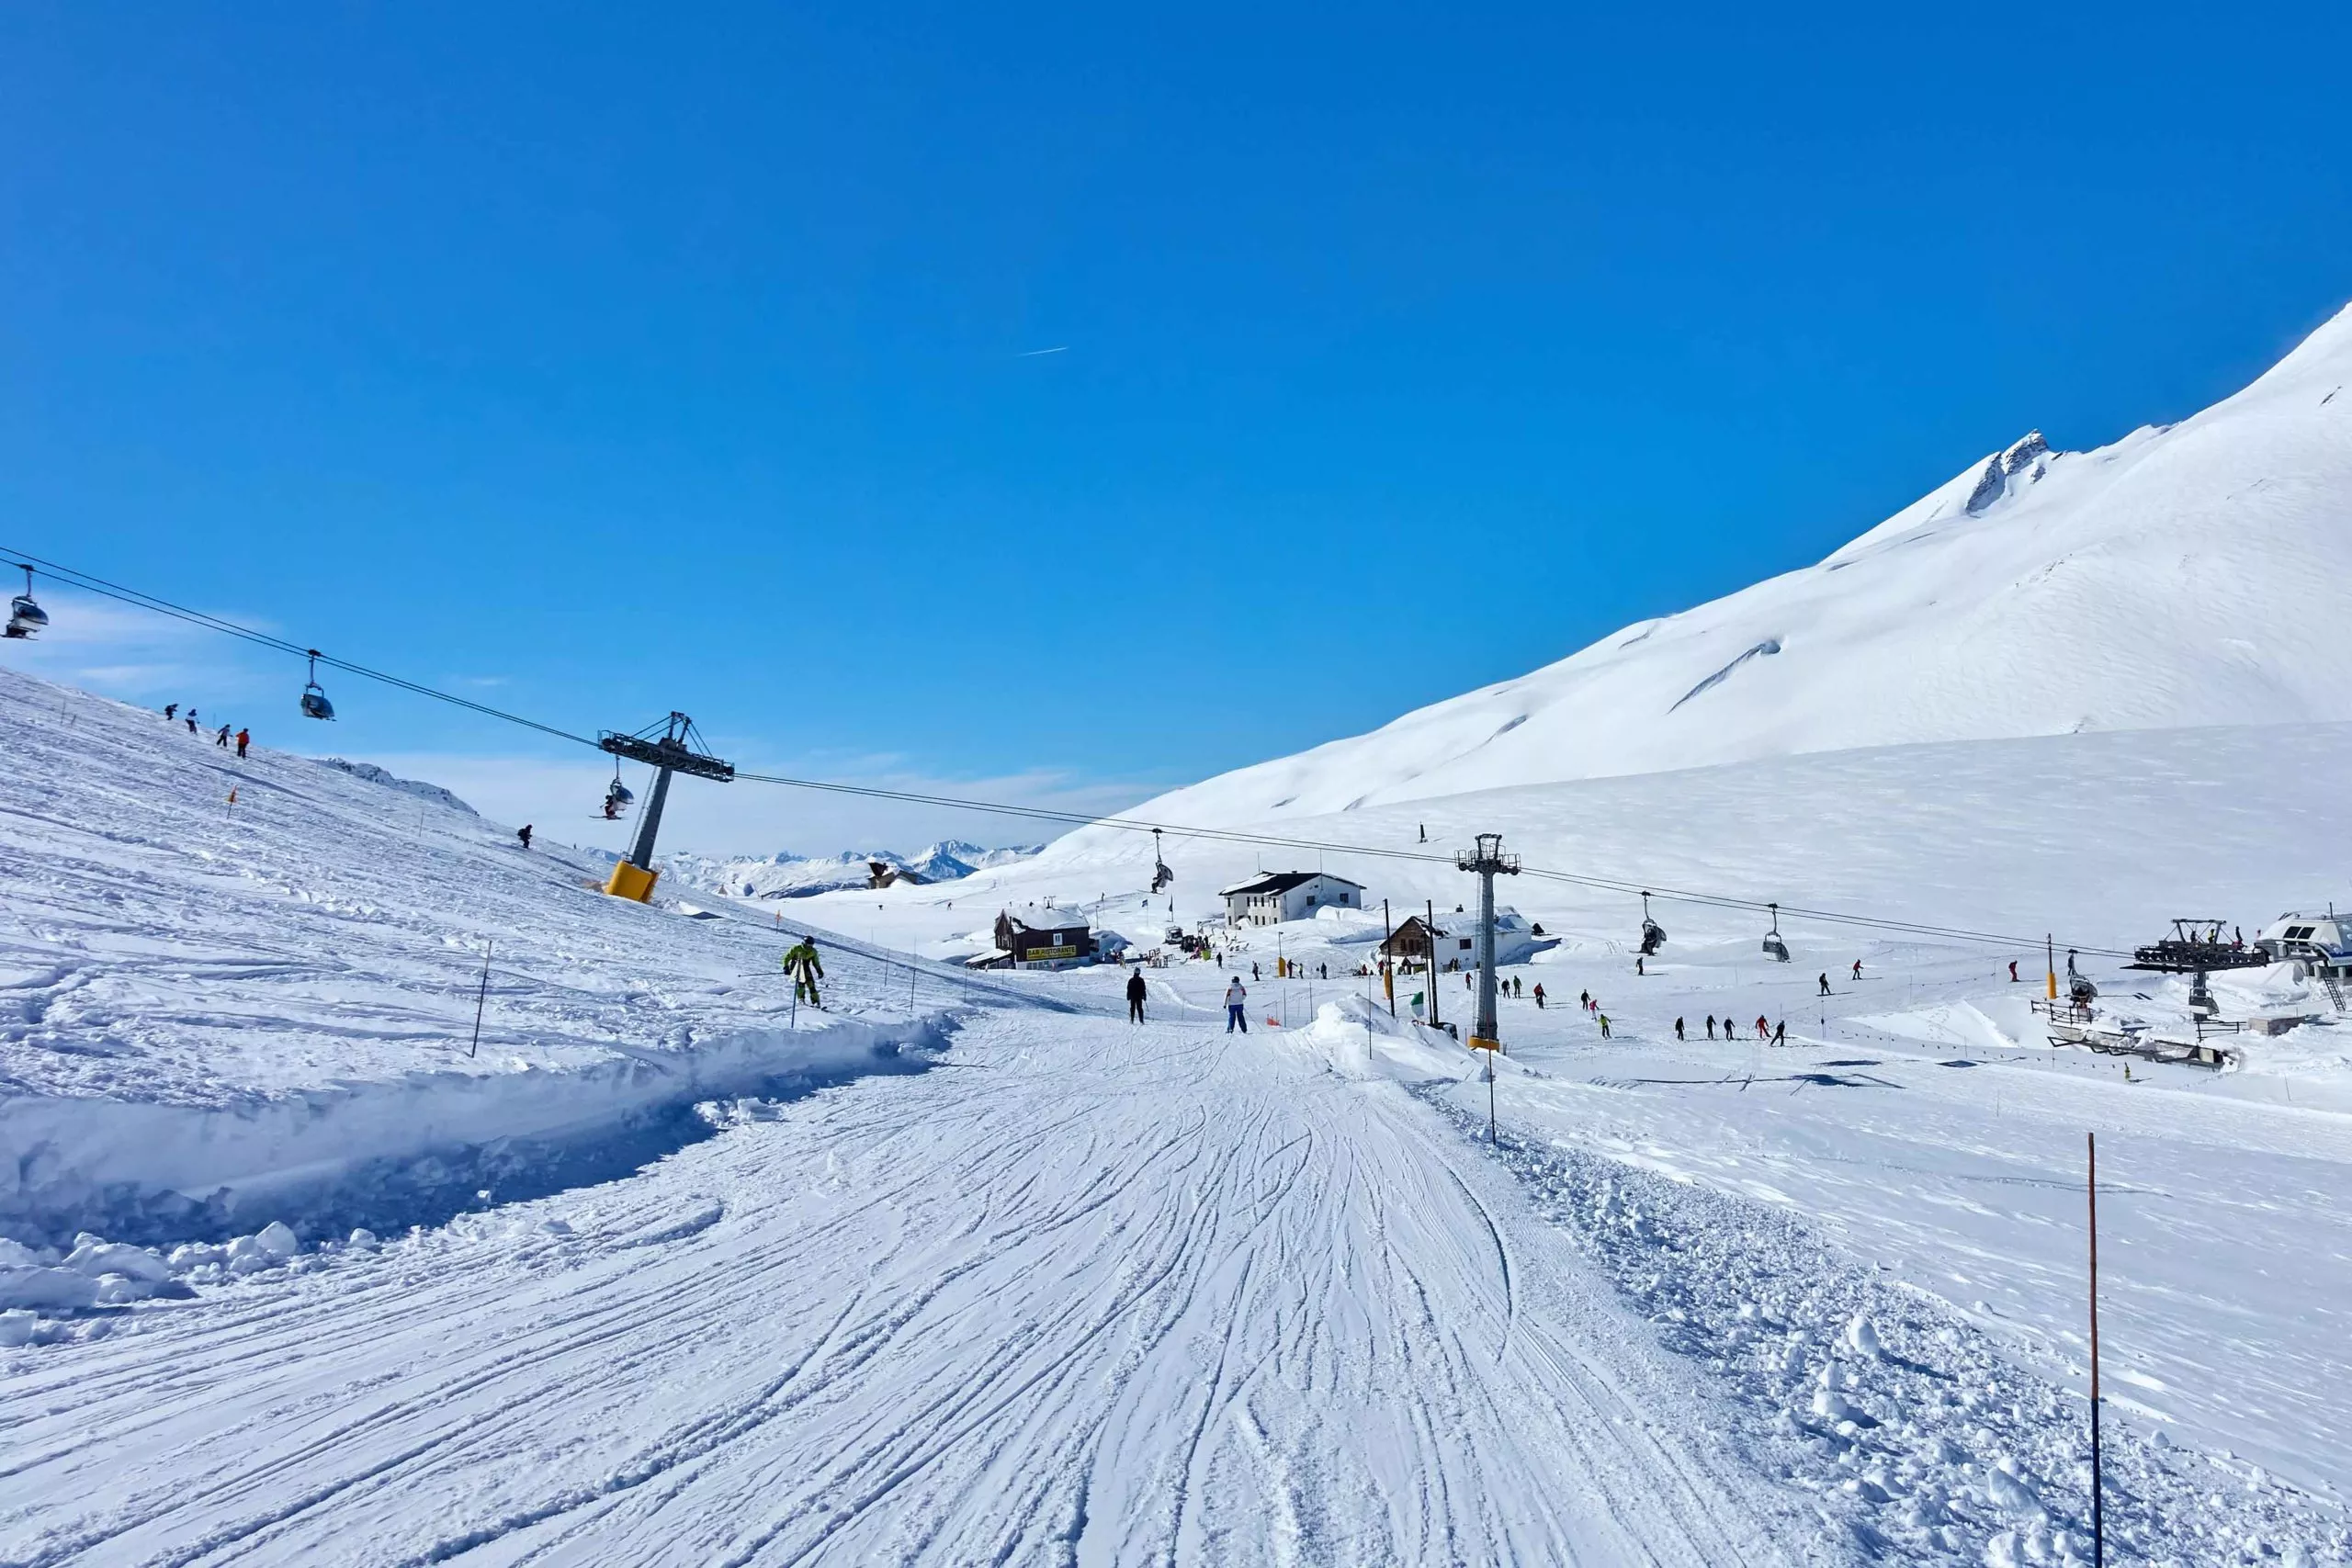 Pila in Italy, Europe | Snowboarding,Skiing - Rated 4.1